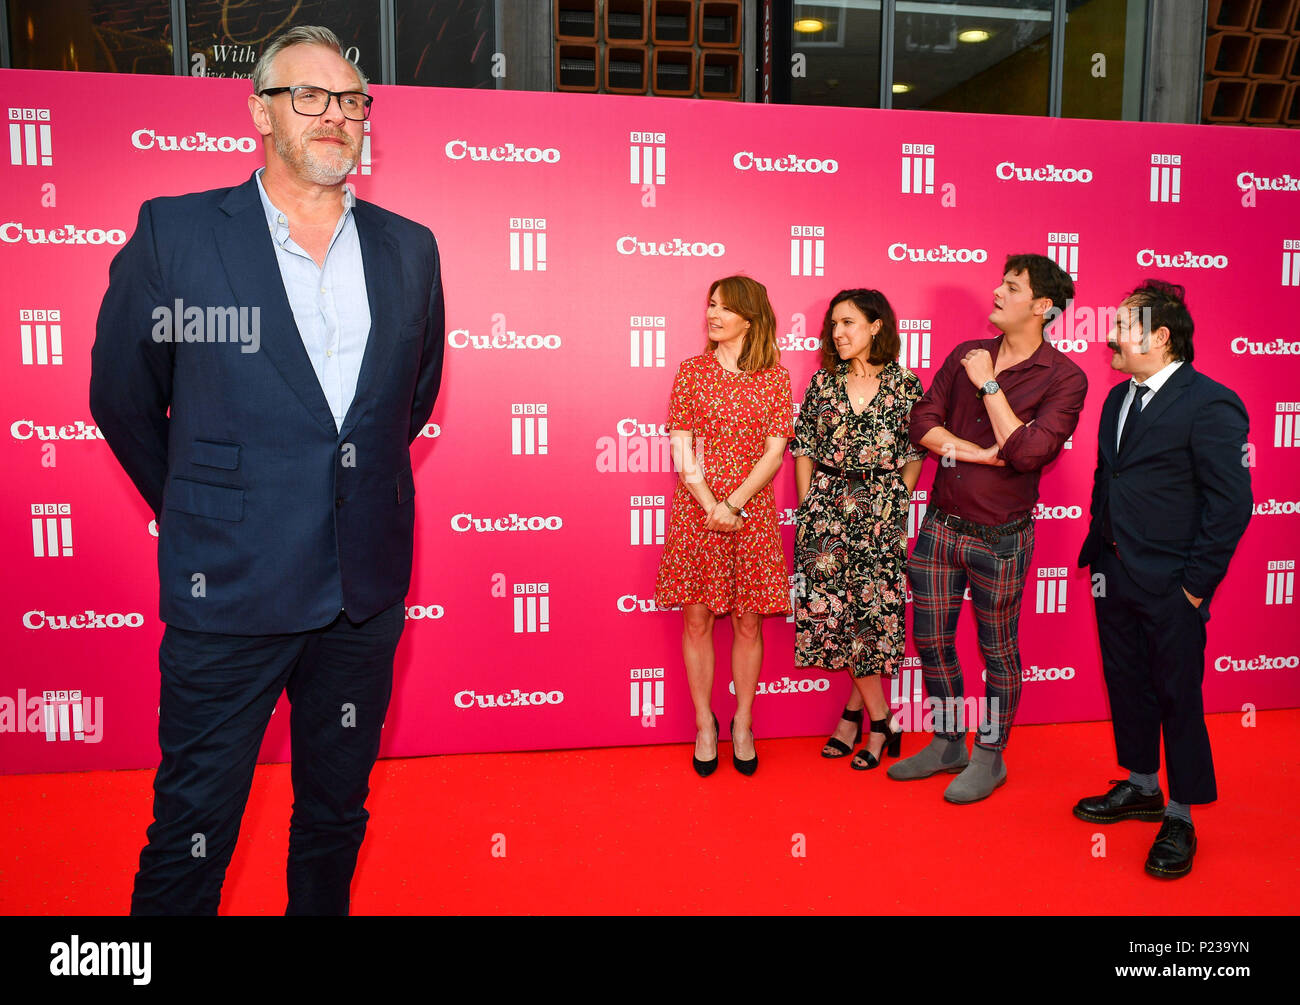 Cuckoo cast members (left to right) Greg Davies, Helen Baxendale, Esther Smith, Tyger Drew-Honey and Kenneth Collard, at the premiere of the next series of Cuckoo at Lichfield Garrick Theatre, Castle Dyke, Lichfield. Stock Photo